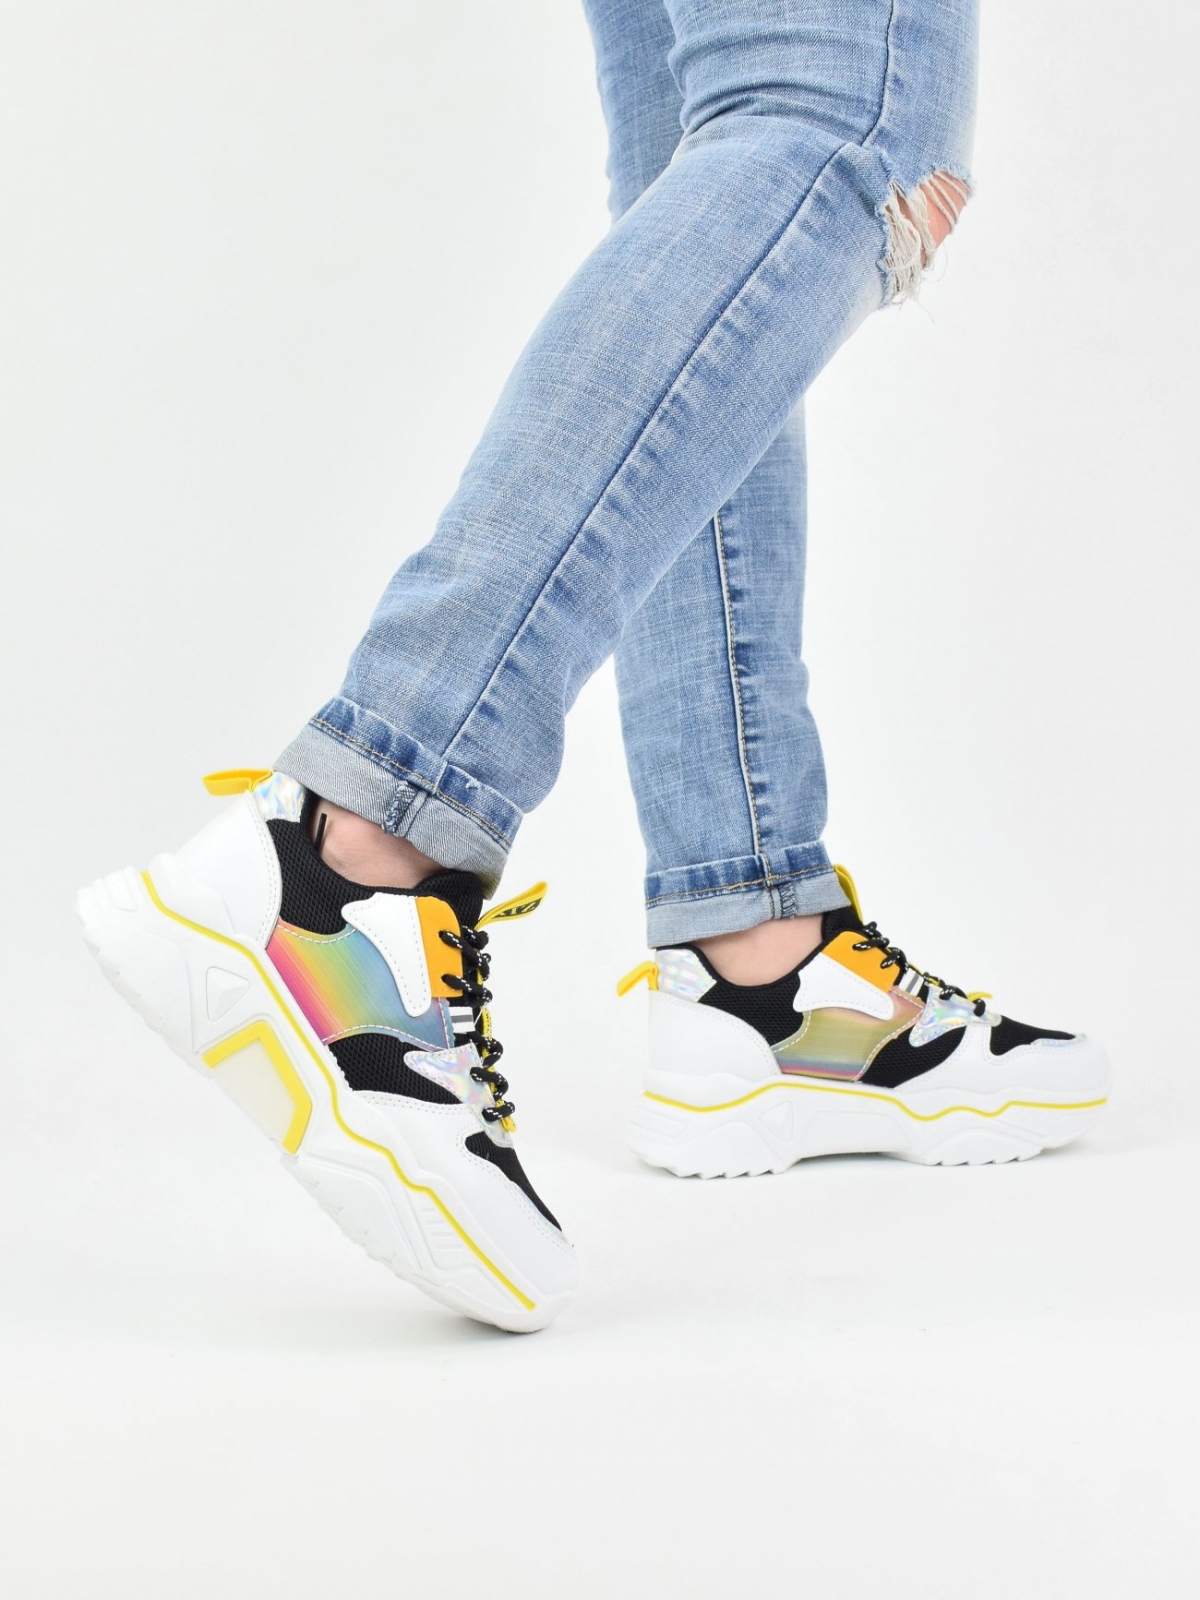 Stylish sneakers with holographic details in yellow